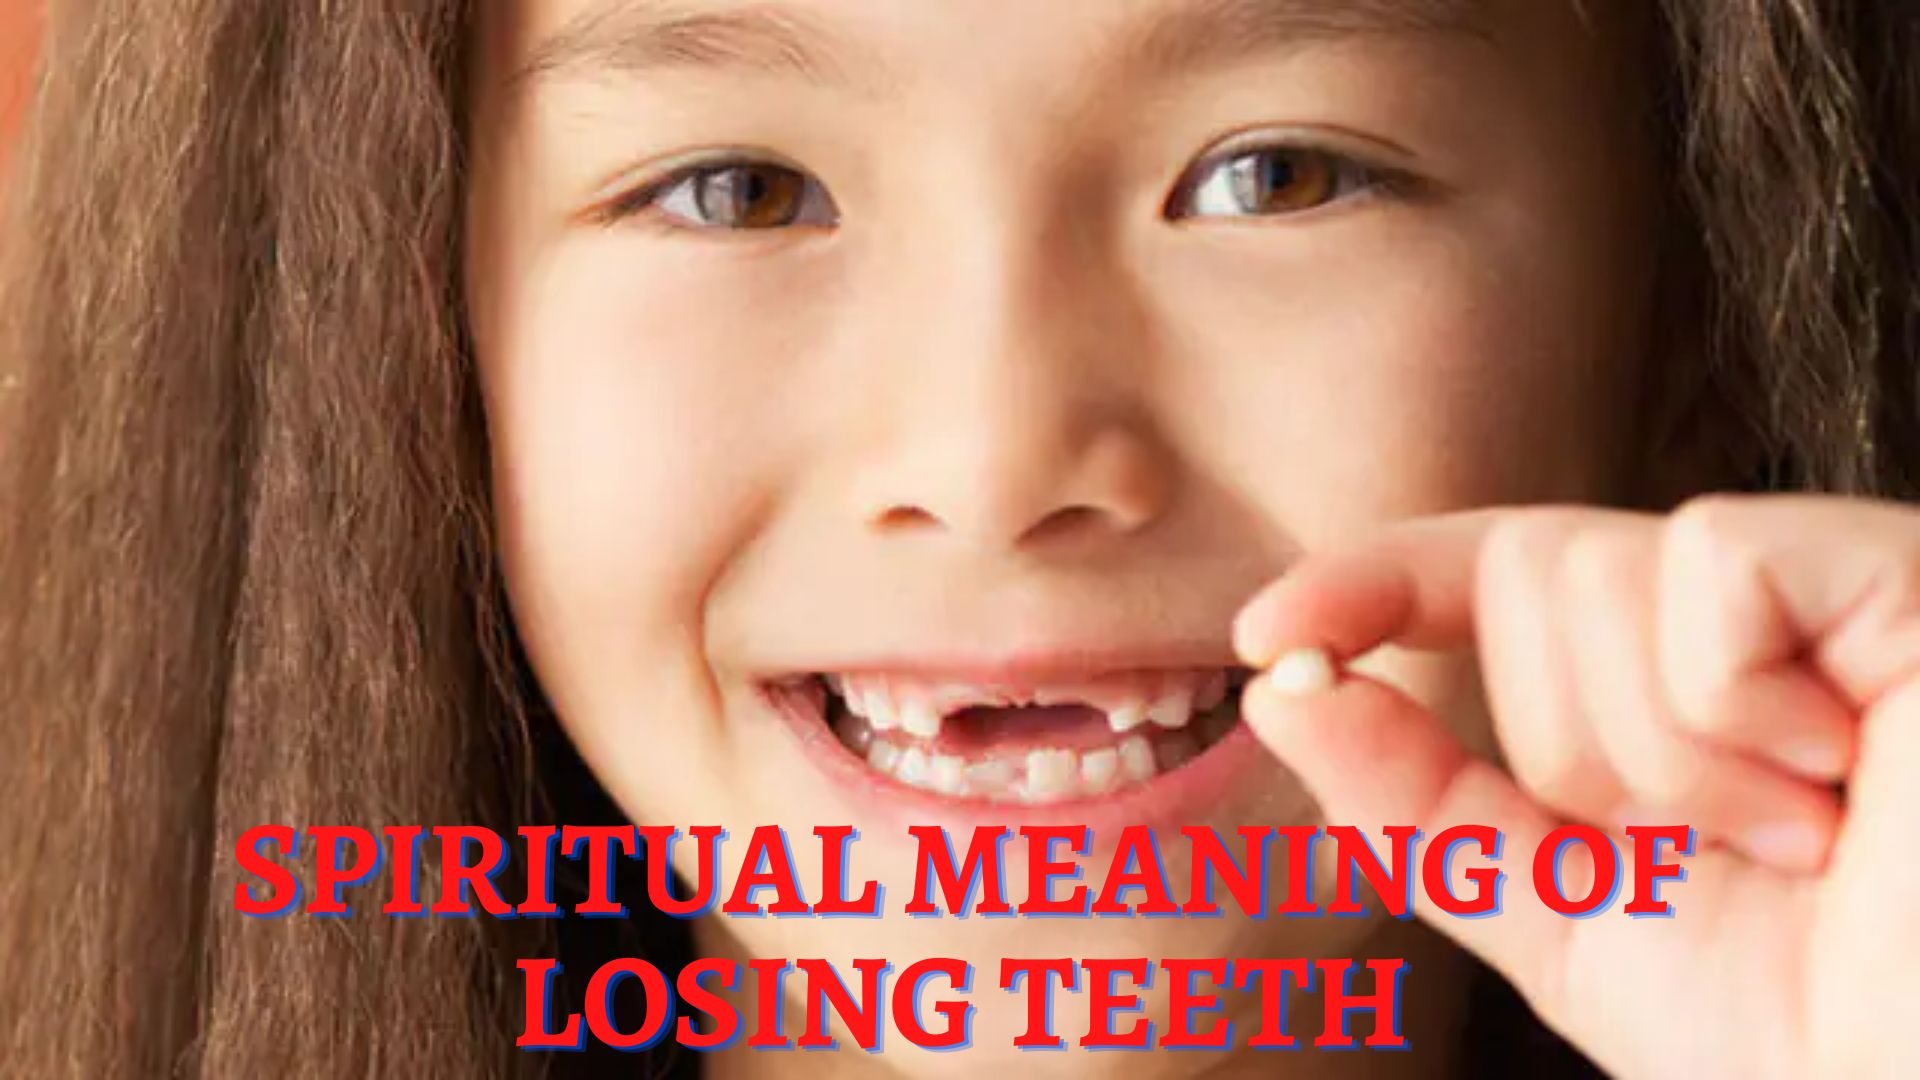 Spiritual Meaning Of Losing Teeth - Representing Fear And Oppression